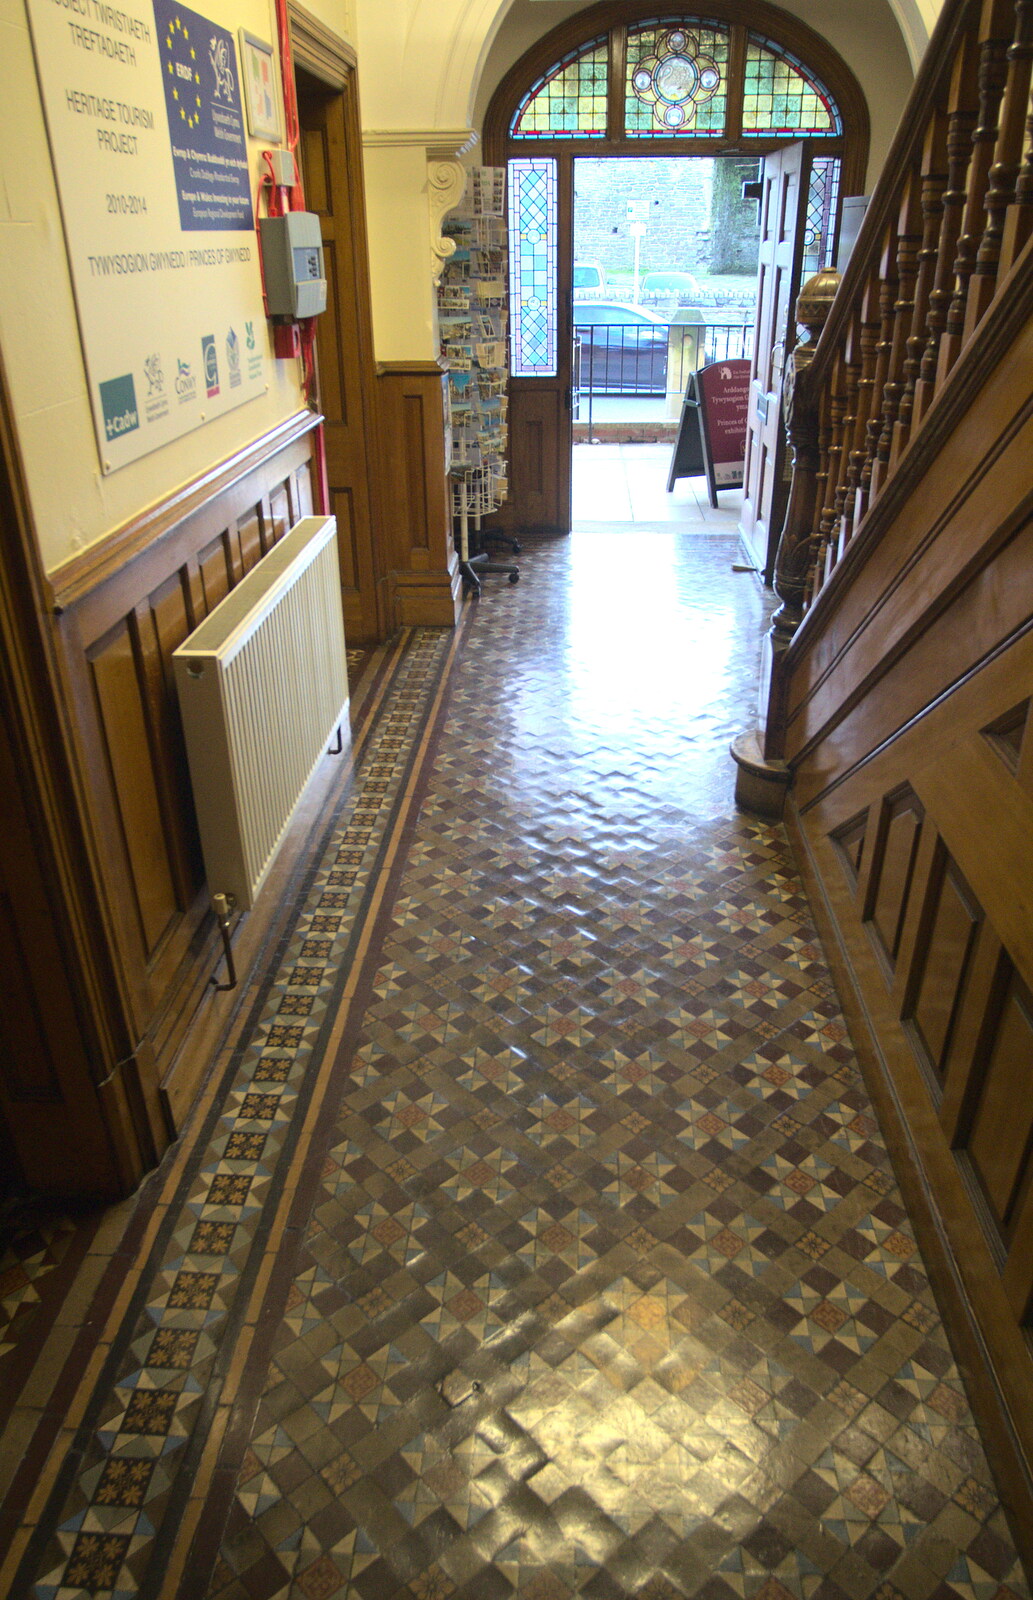 The nice Victorian floor of the Tourist Office from Conwy, Holyhead and the Ferry to Ireland - 21st December 2015